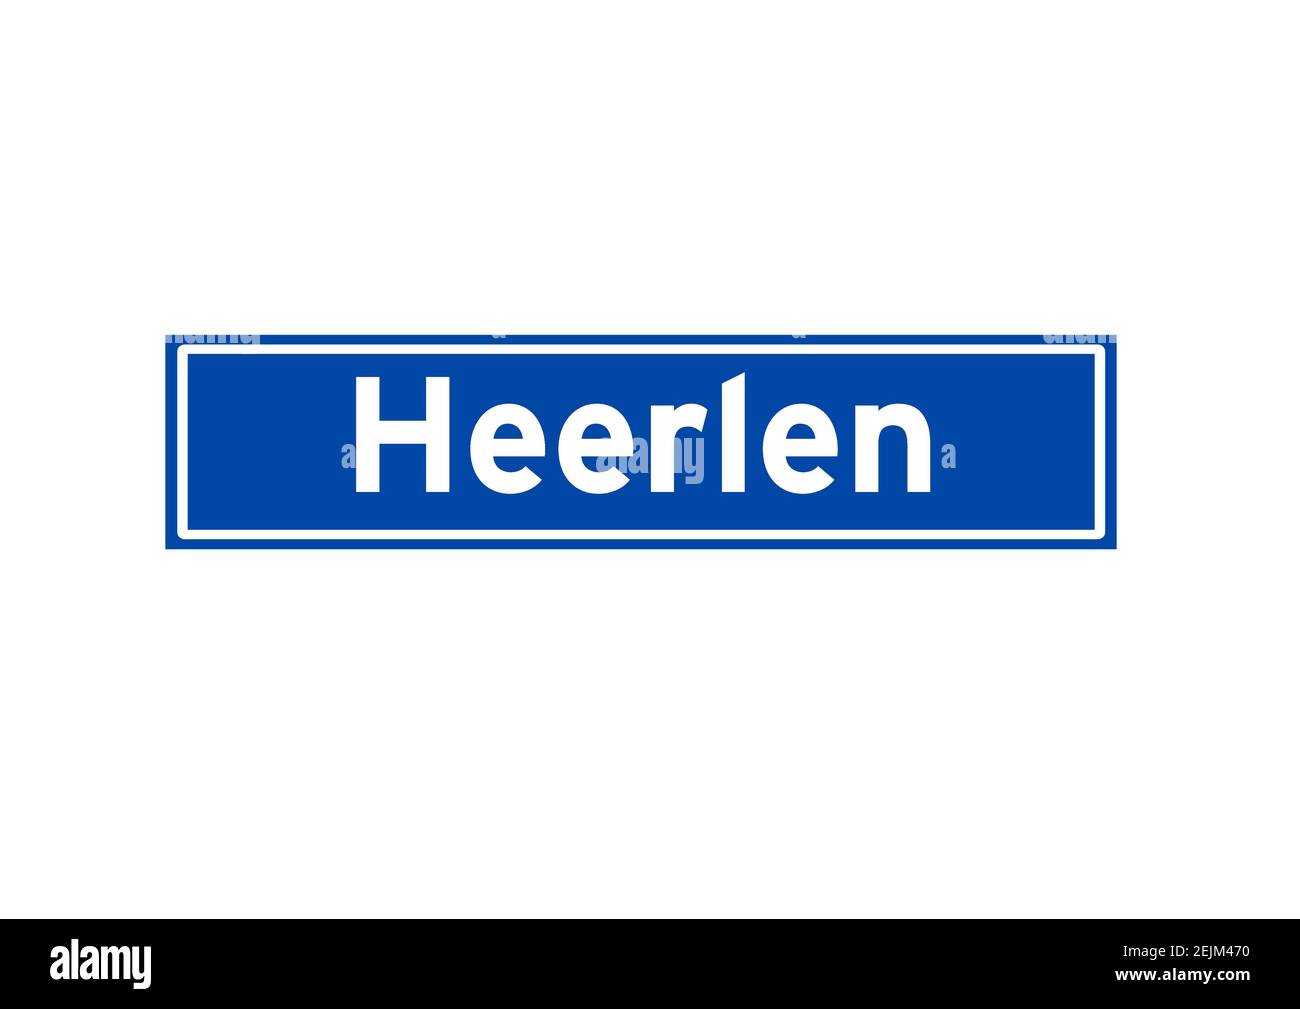 Heerlen isolated Dutch place name sign. City sign from the Netherlands. Stock Photo